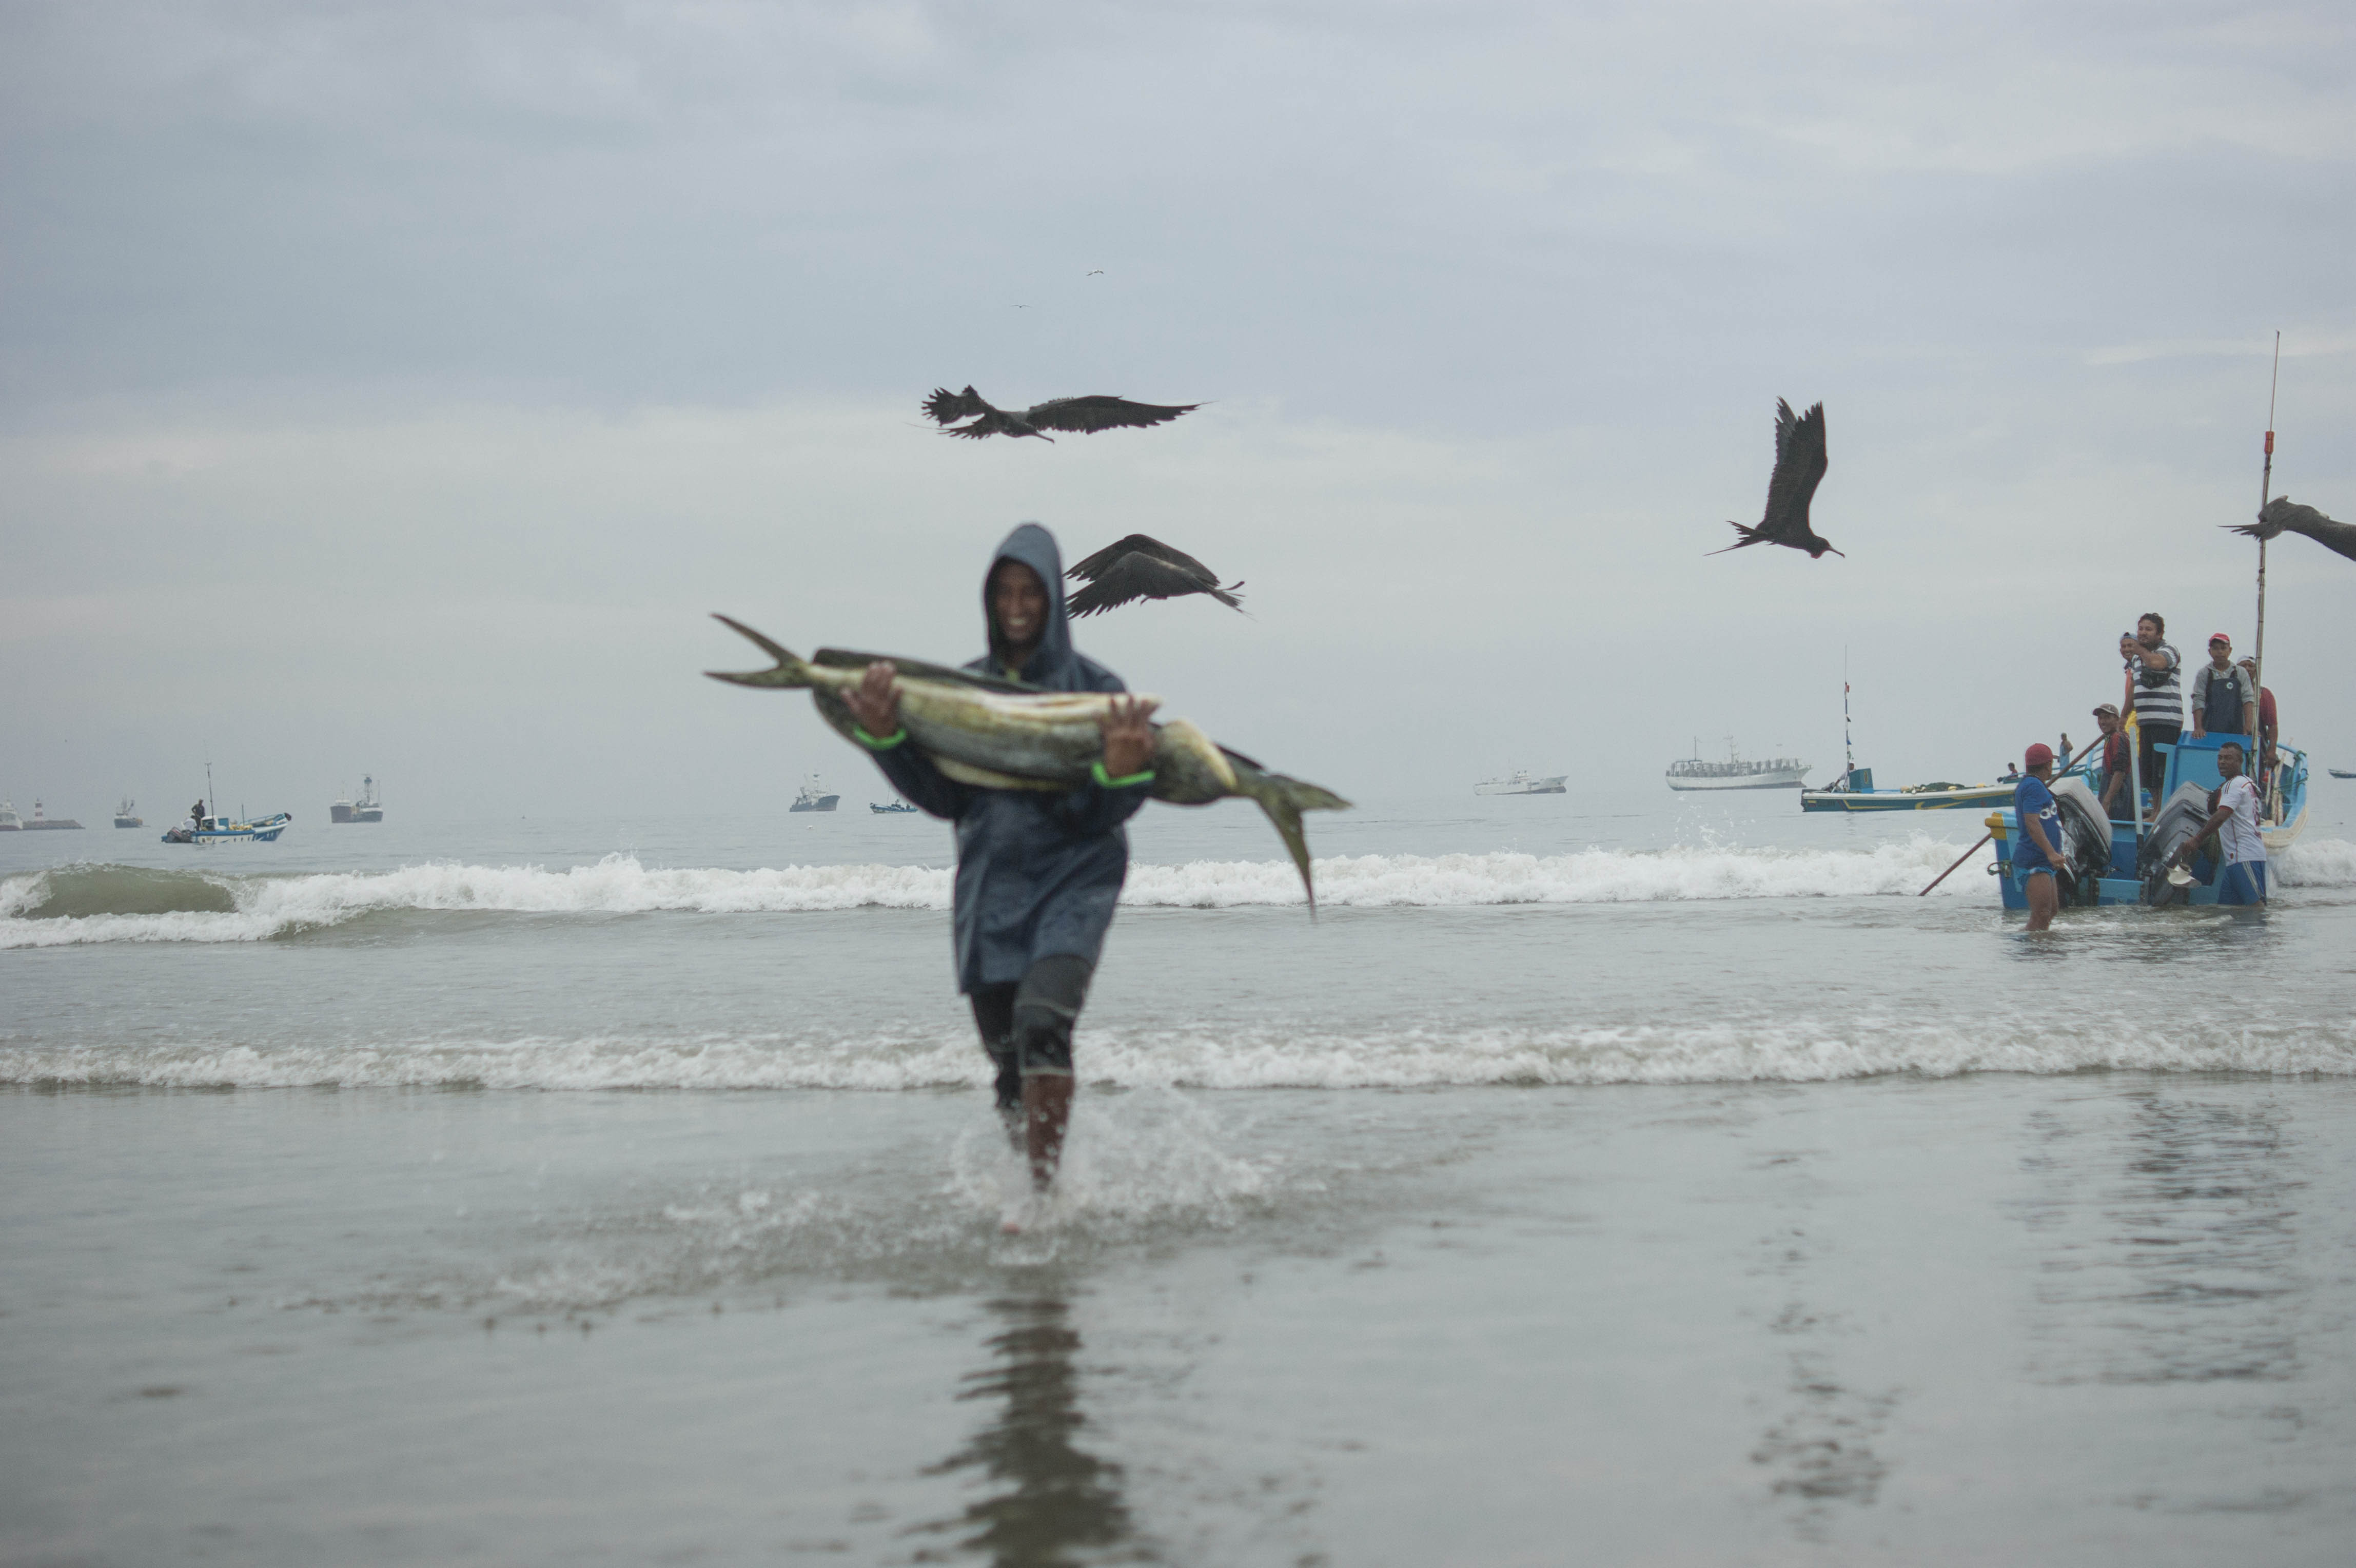 The cach of the day is taken to the beach by a fish collector in the town of Port Lopez, Ecuador